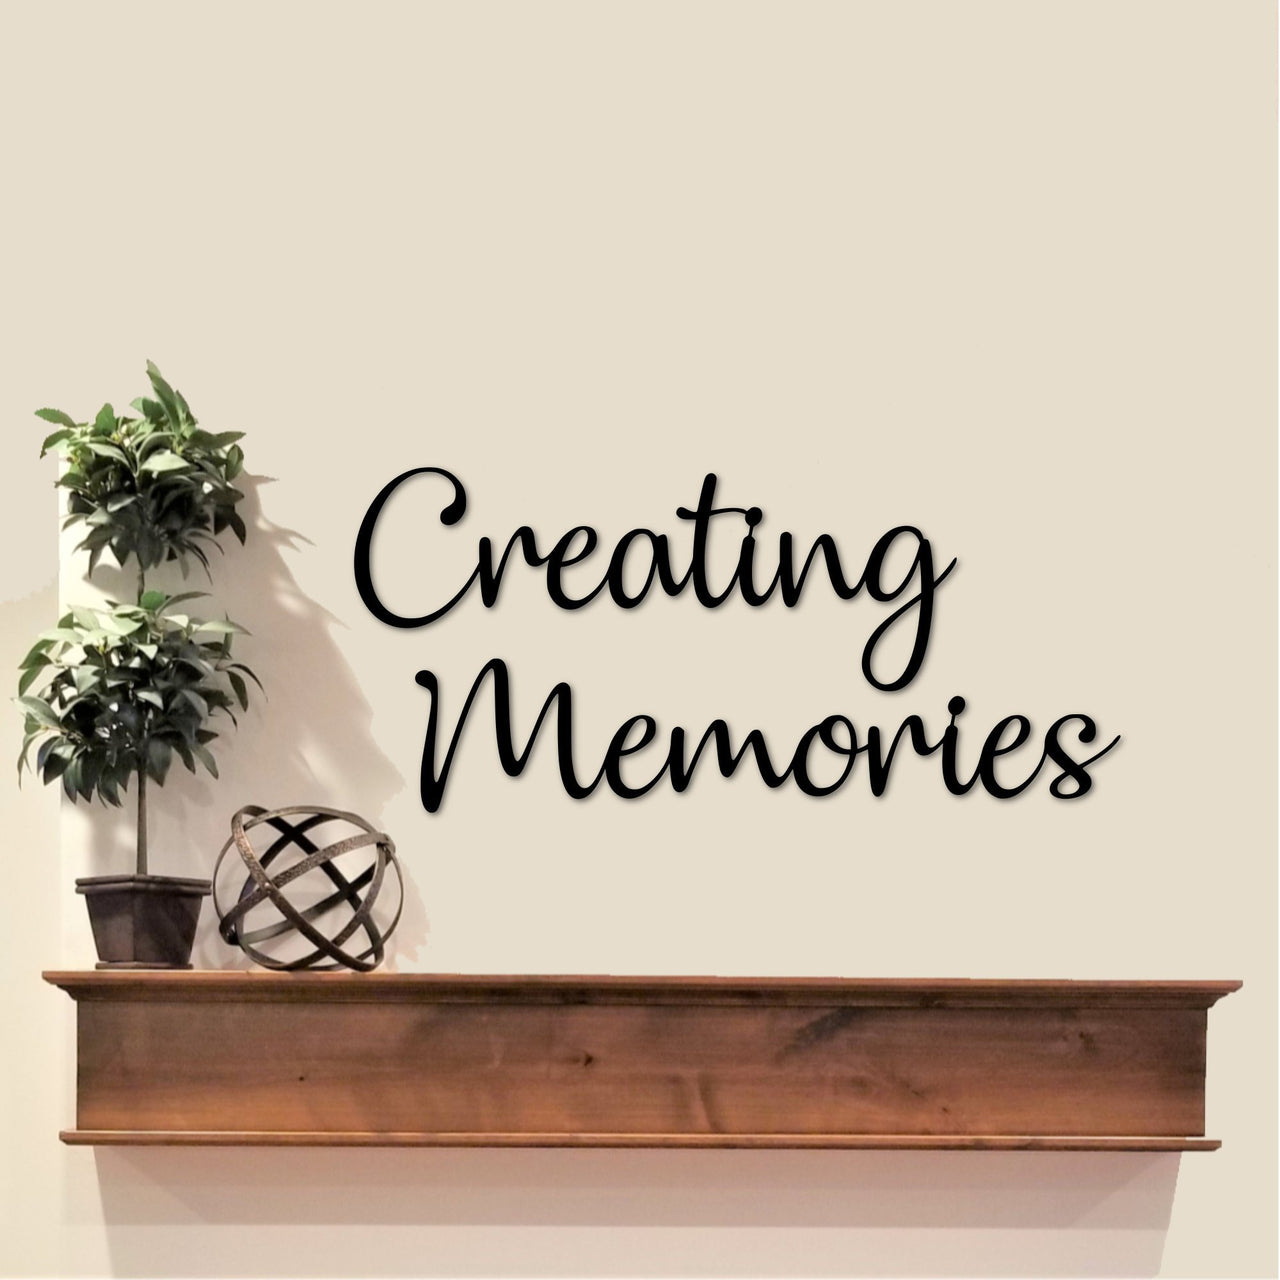 Creating Memories Sign | Metal Wall Art | Word Signs | Gallery Wall Decor | Farmhouse Decor | Family Room Decor | Memories Sign for Wall